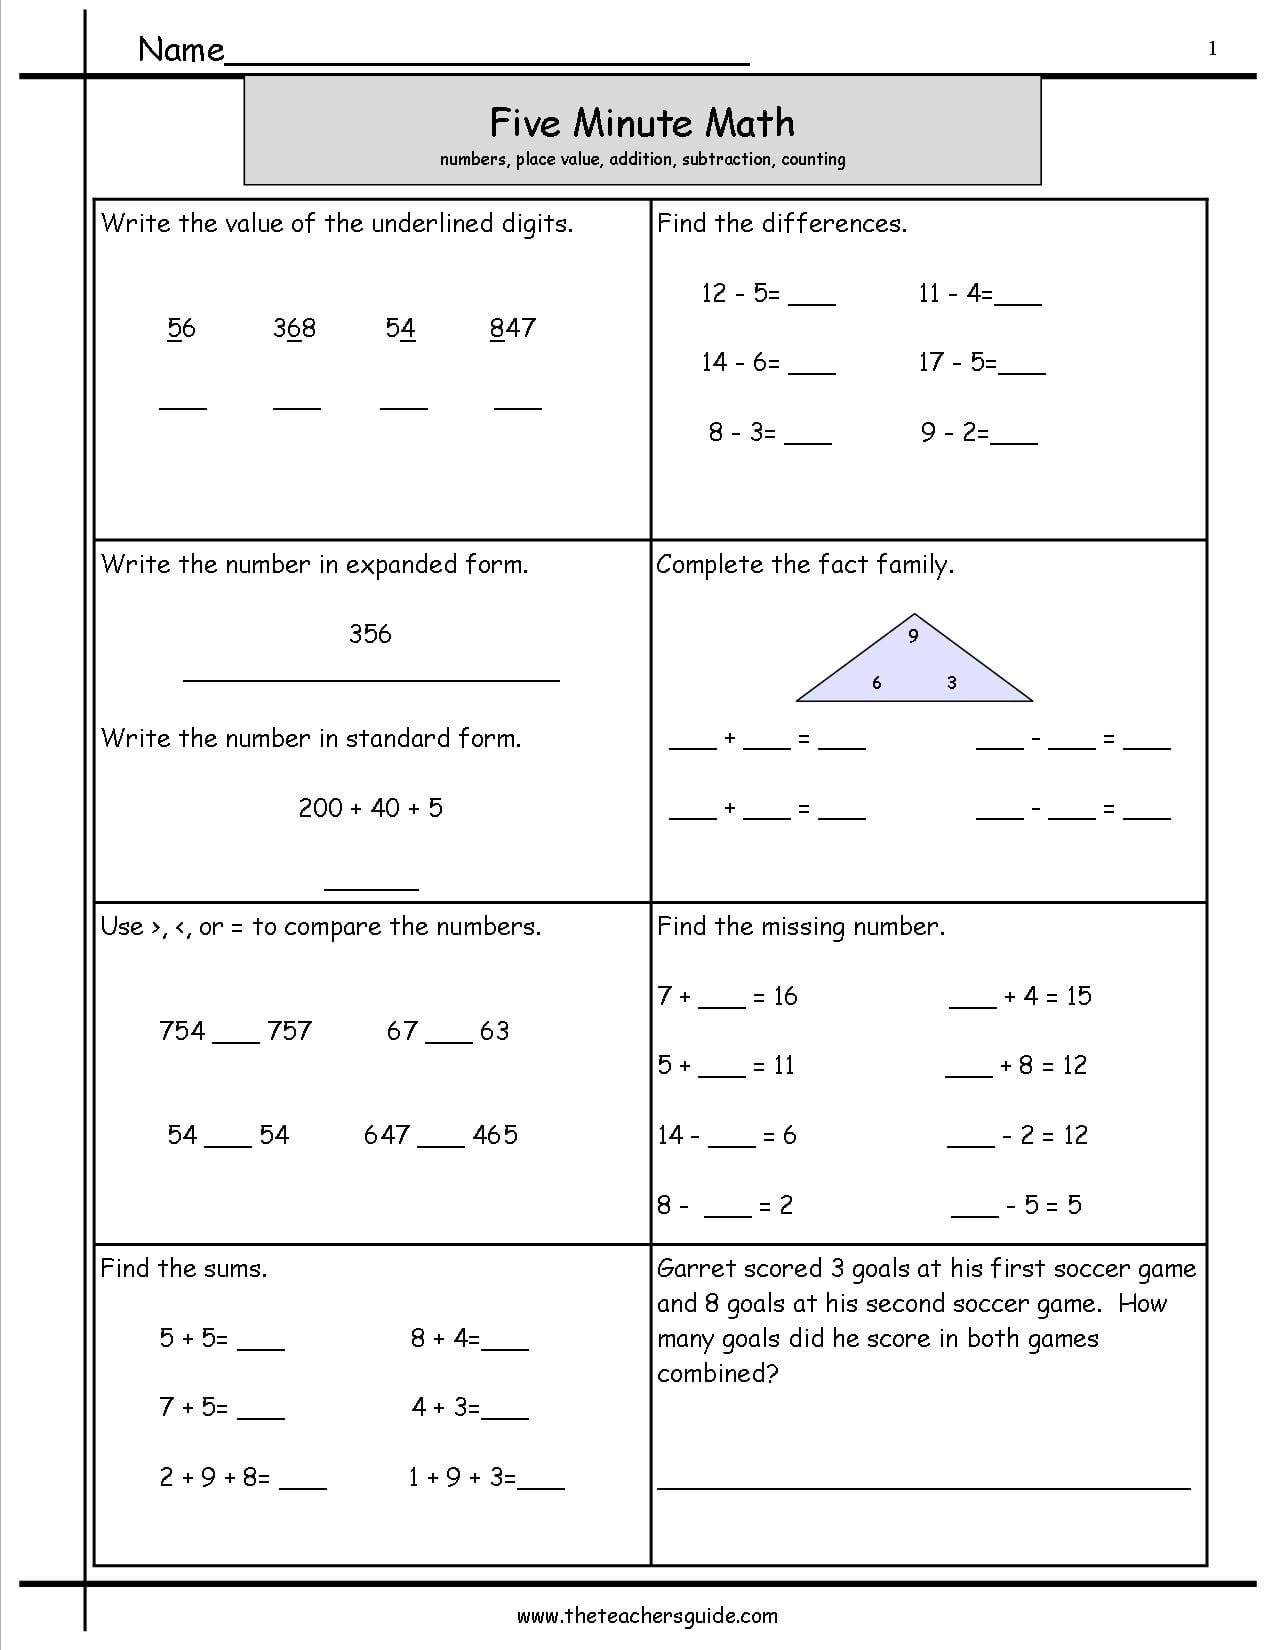 Worksheet Templates for Microsoft Word